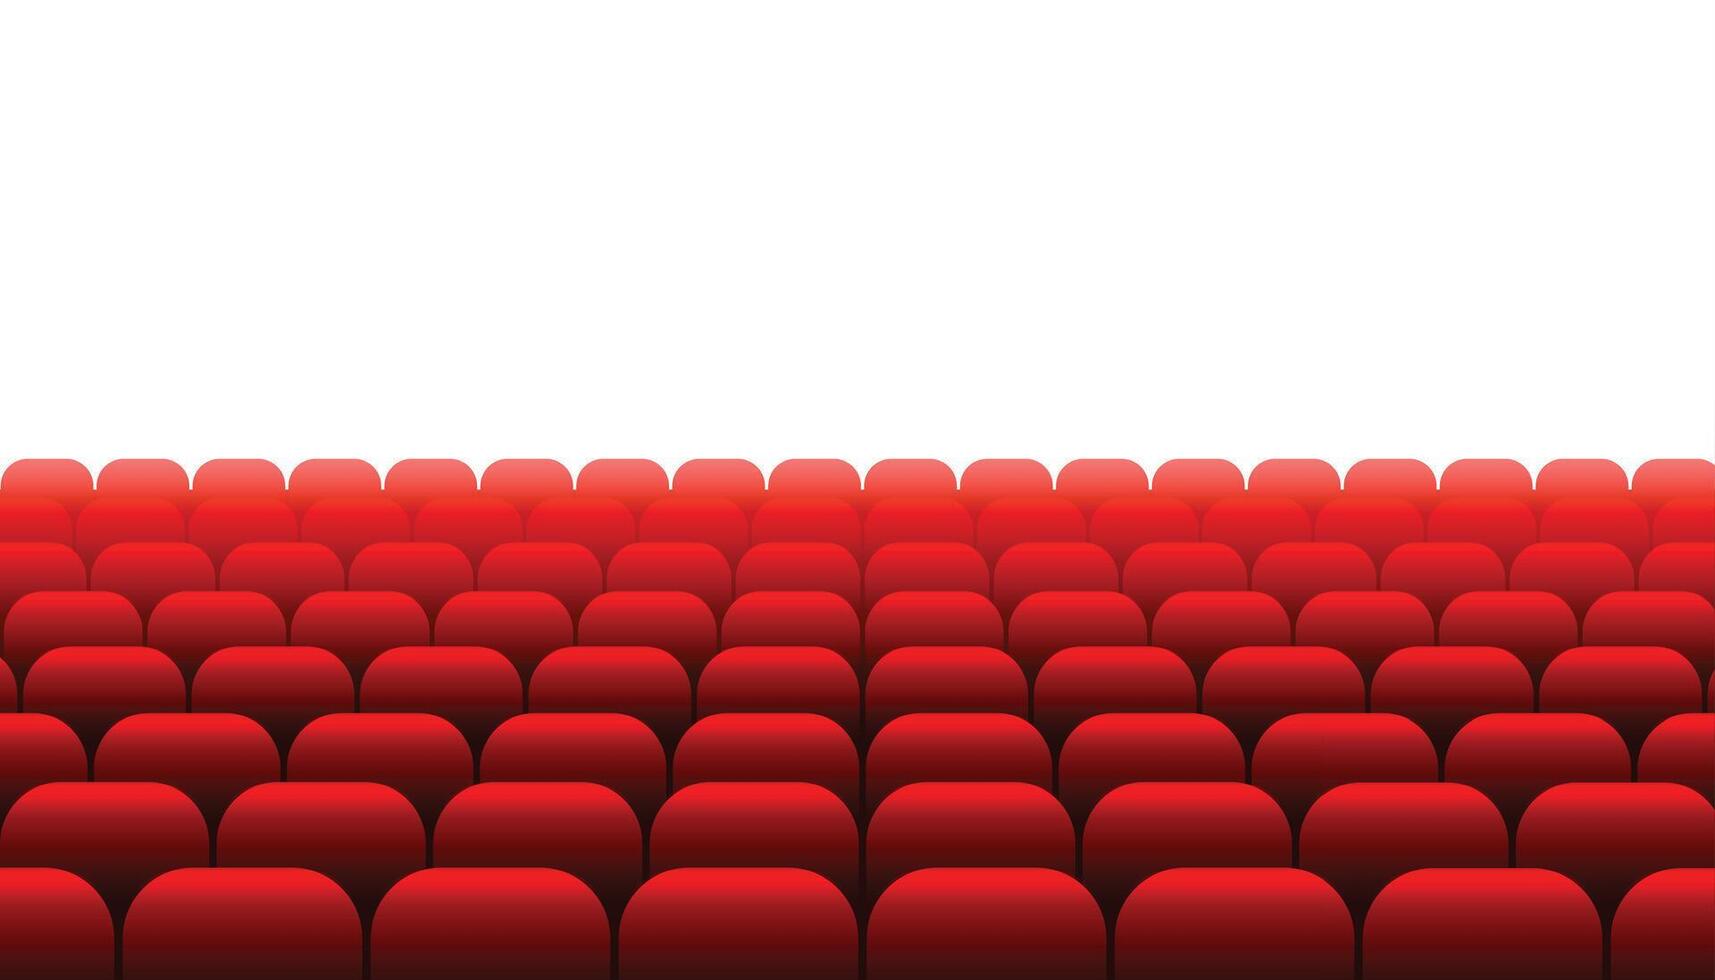 row of red seats movie theater background vector